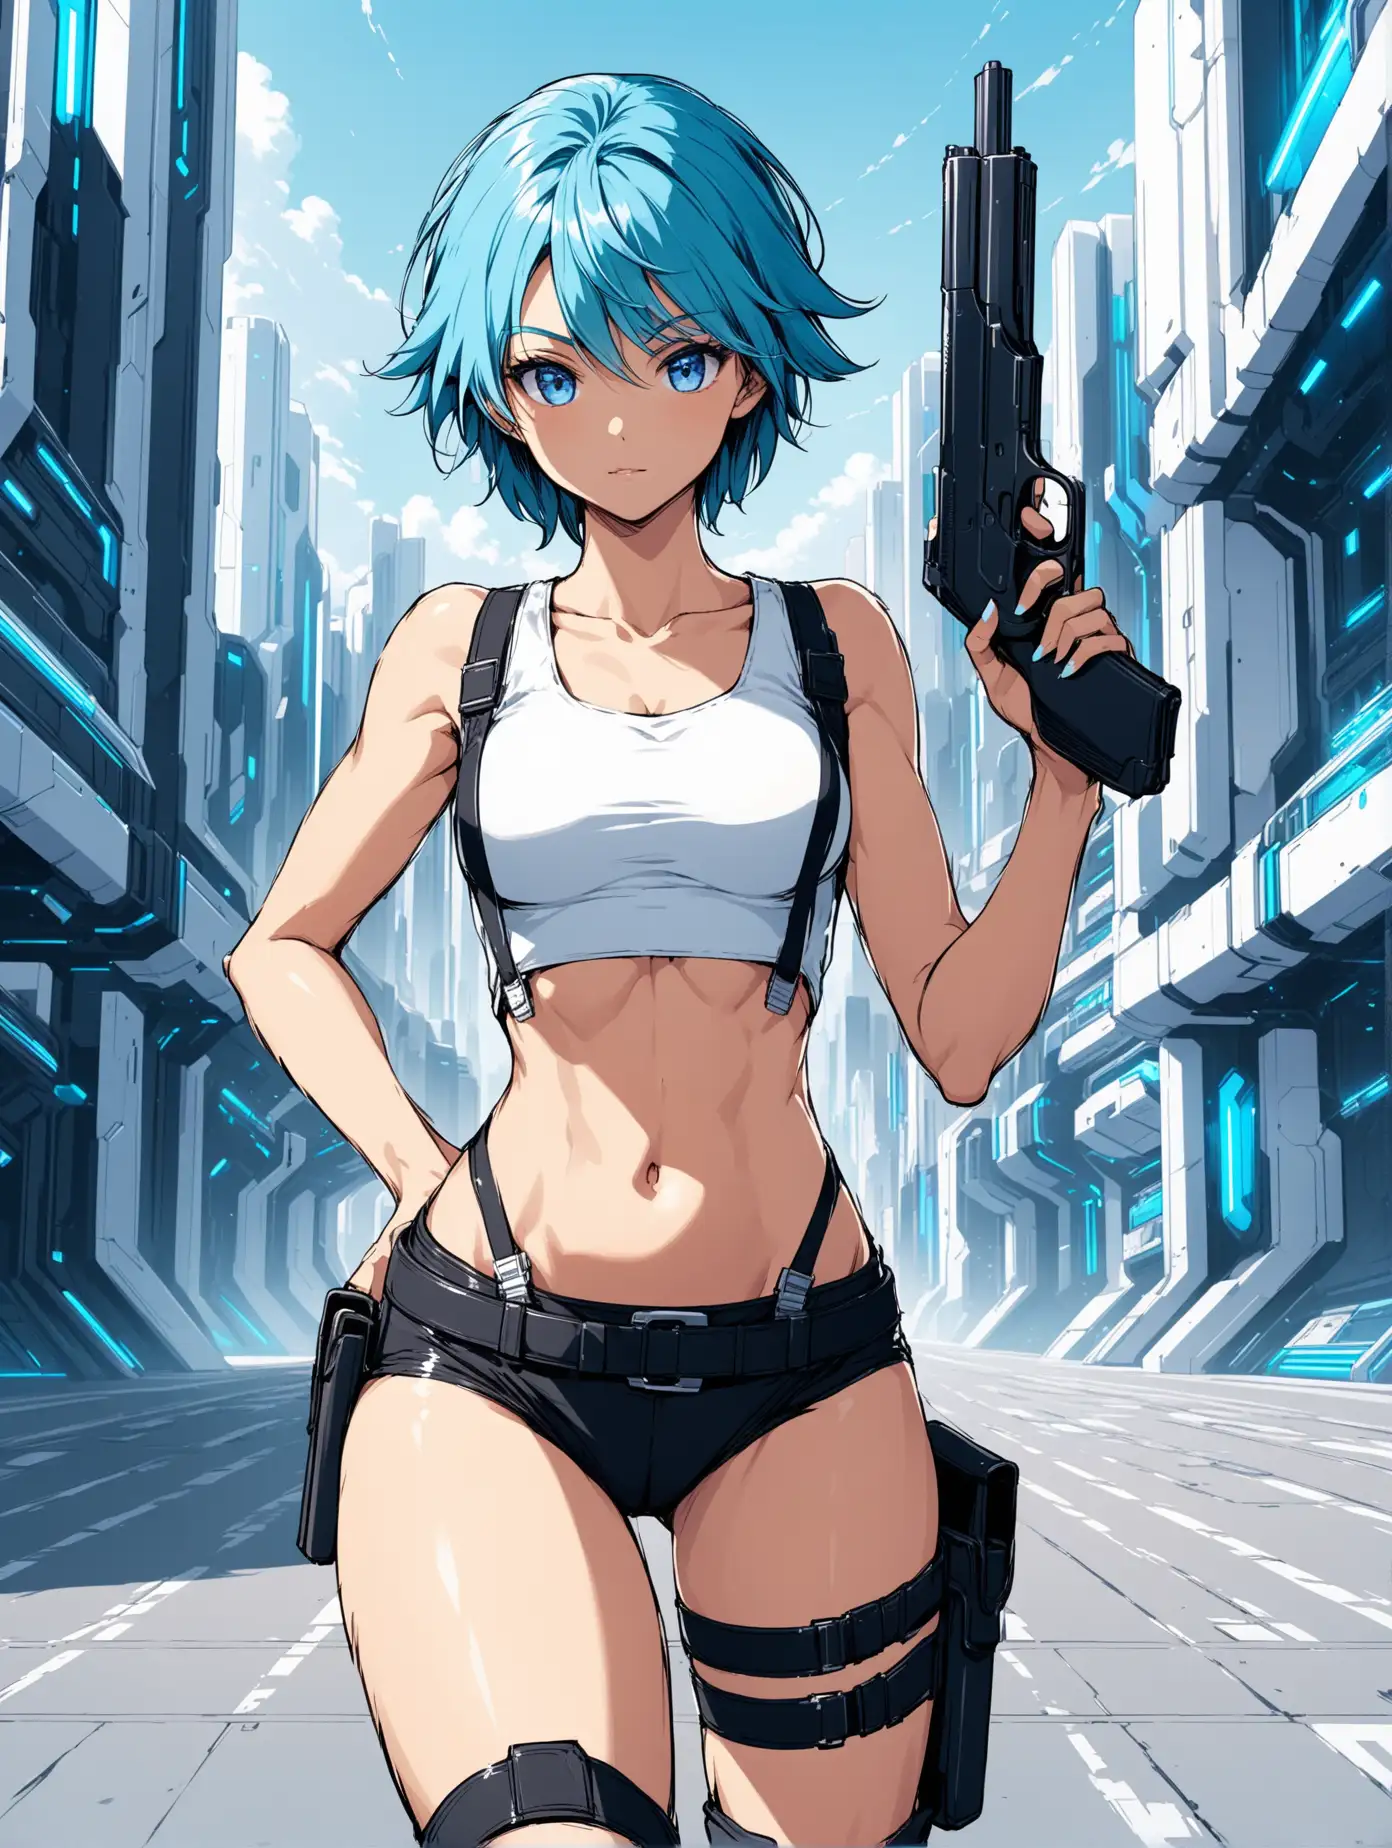 sexy fit 24 year old hero girl, short shaggy blue hair, blue eyes, posing with handguns in futuristic town, super skinny toned body, short white tank top, sexy midriff, wearing suspenders, holsters on each thigh, combat boots, blue black white 3 color minimal design